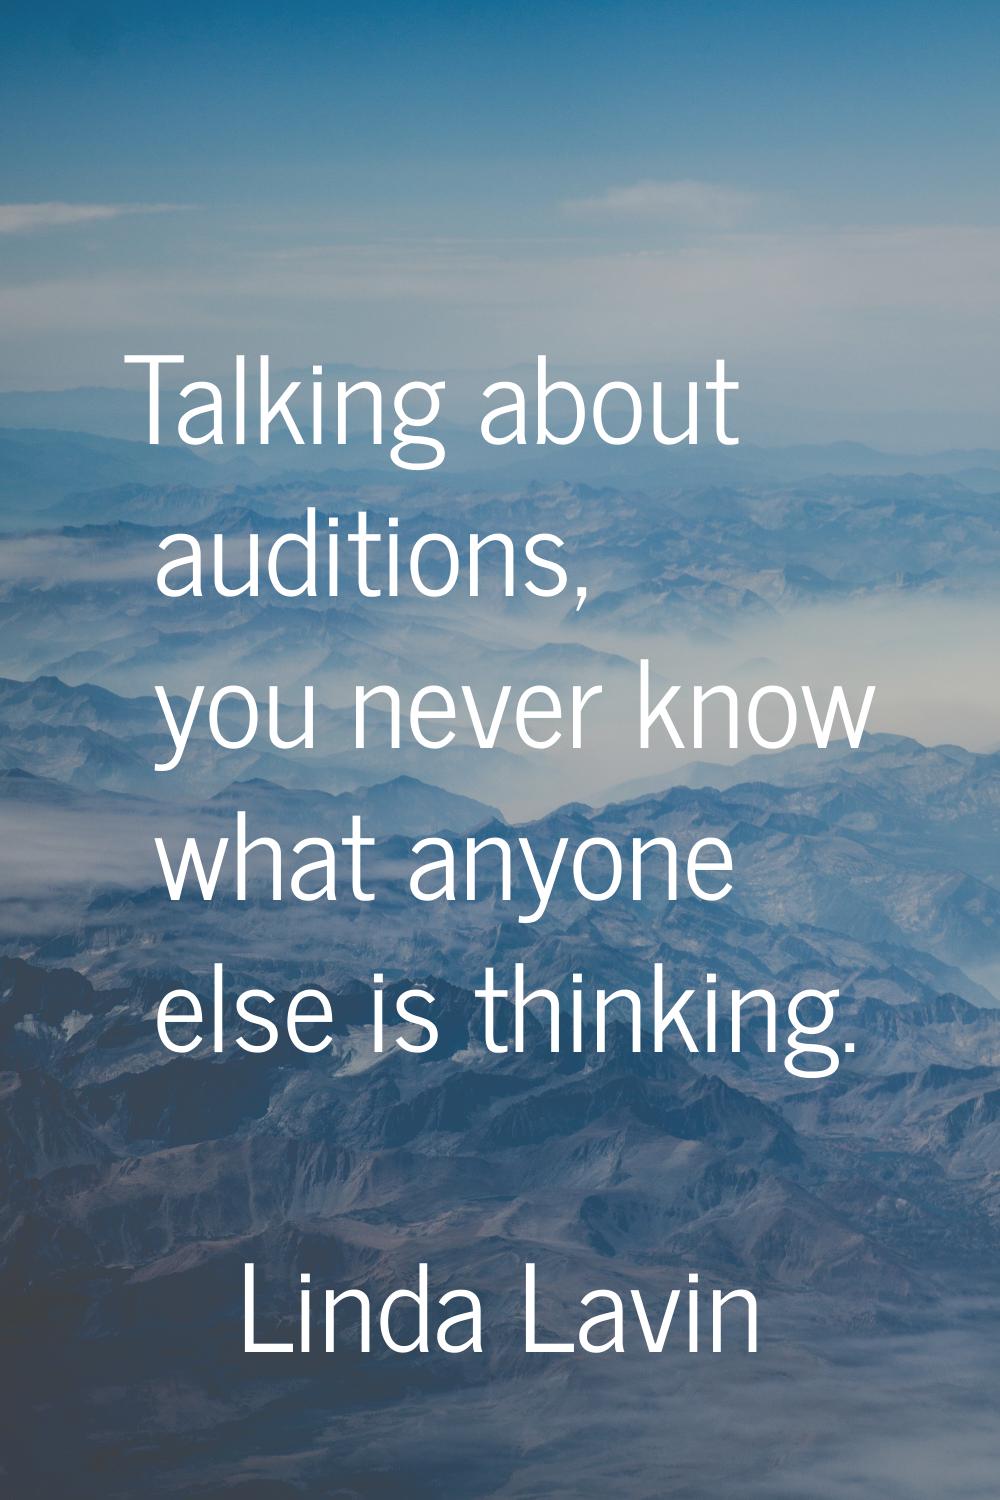 Talking about auditions, you never know what anyone else is thinking.